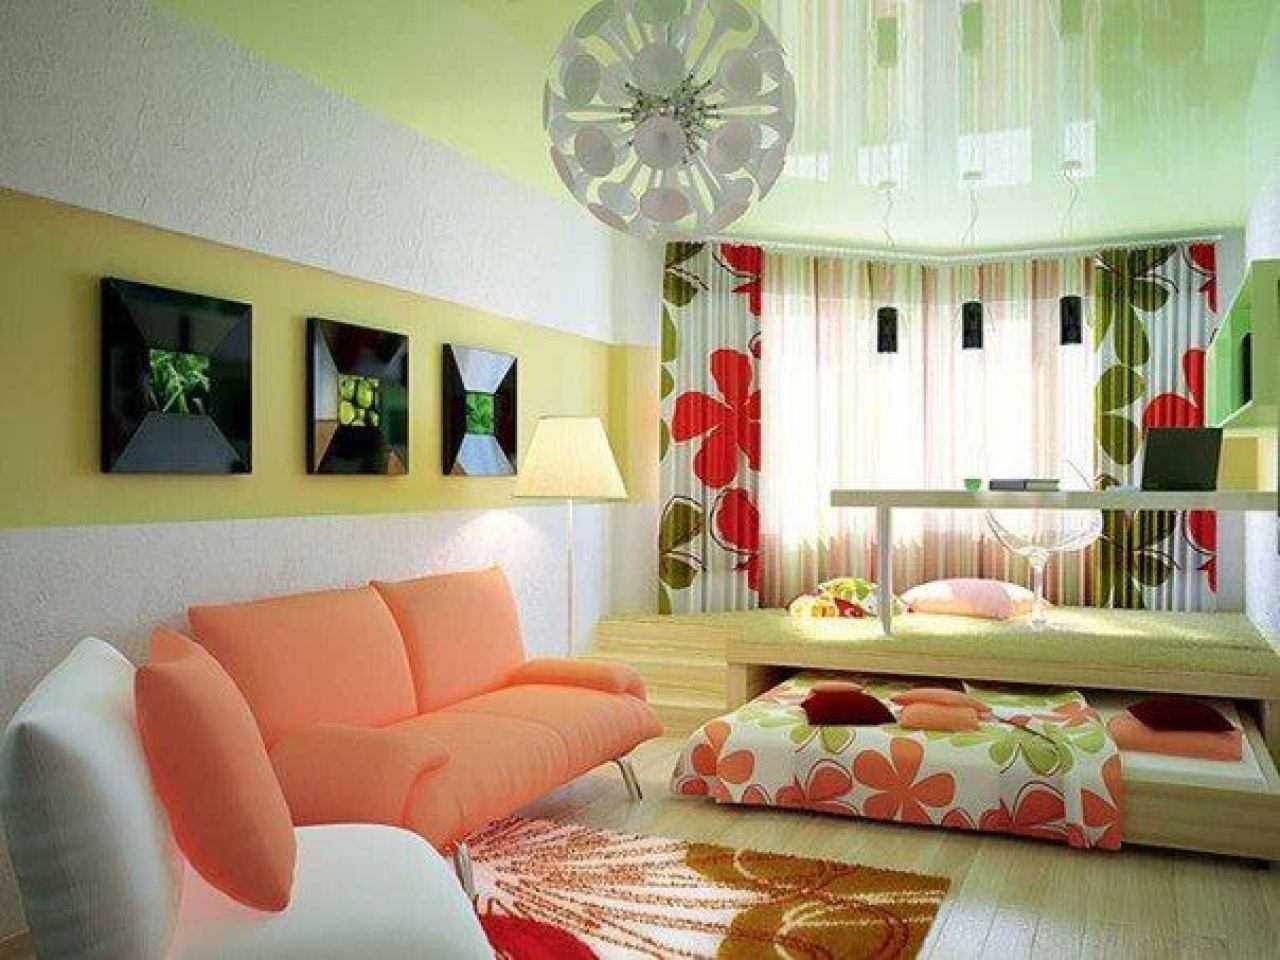 bright decor of the bedroom and living room in one room